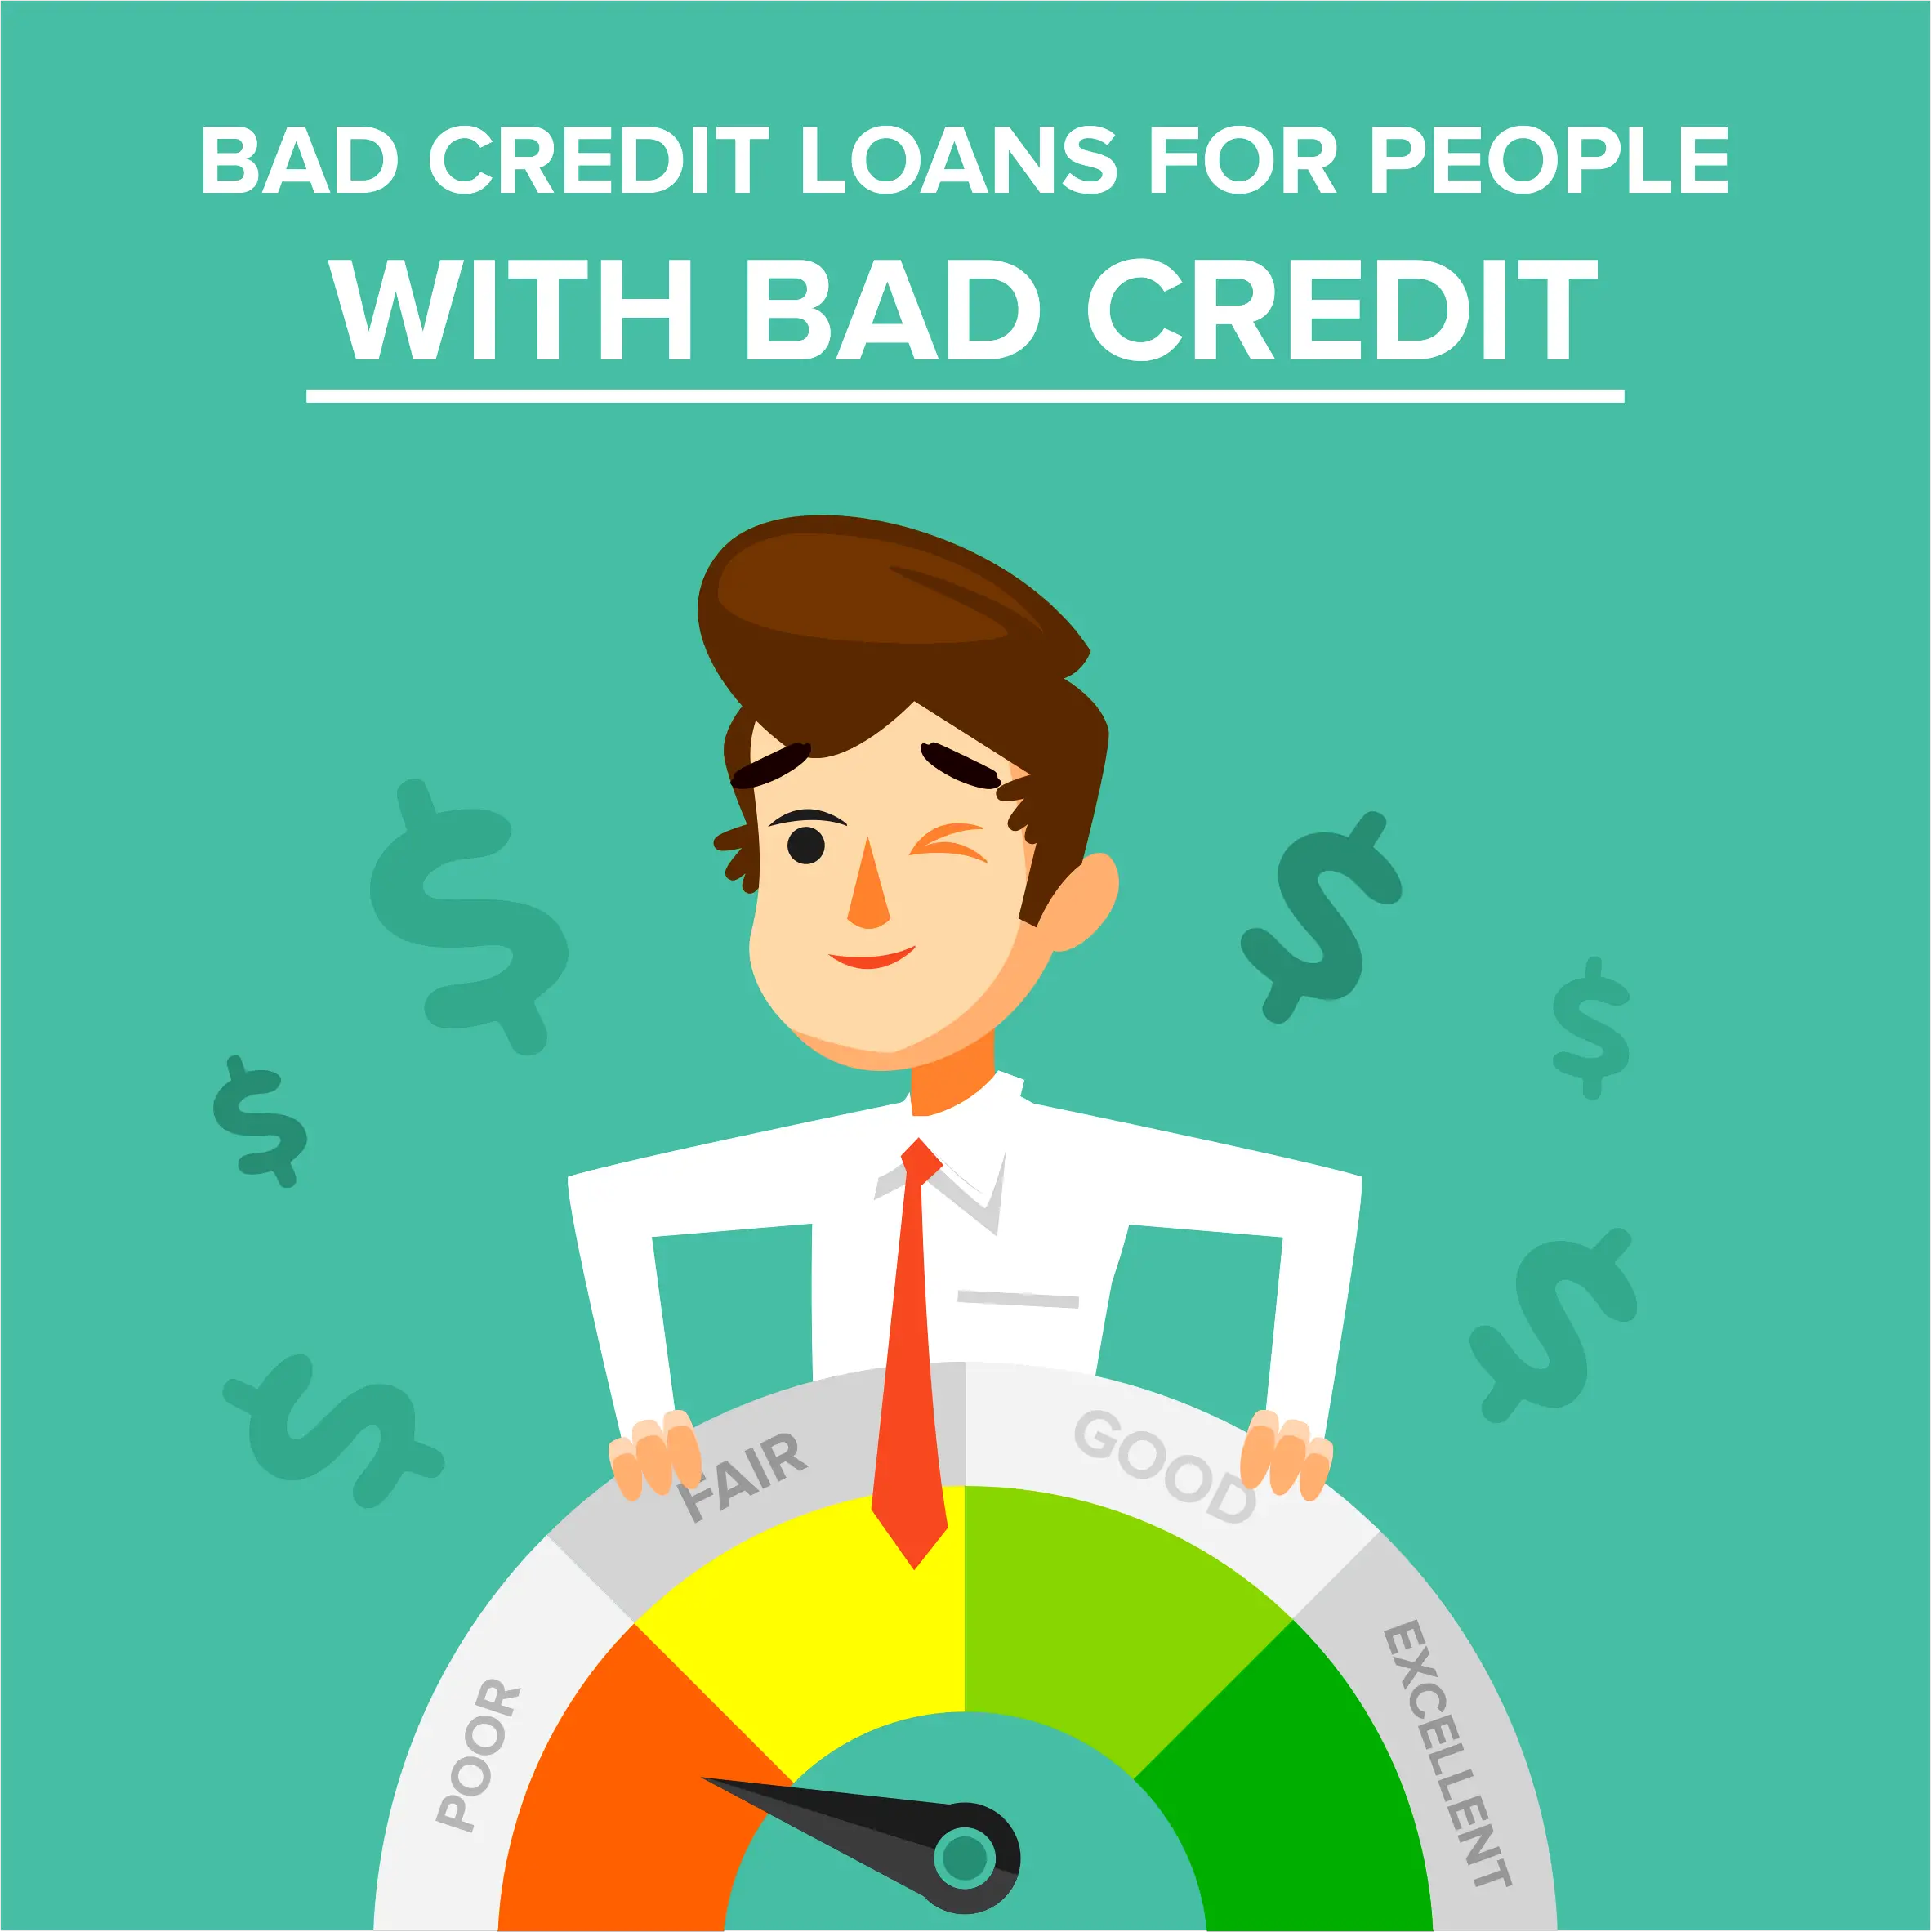 Bad Credit Loans for People With Bad Credit